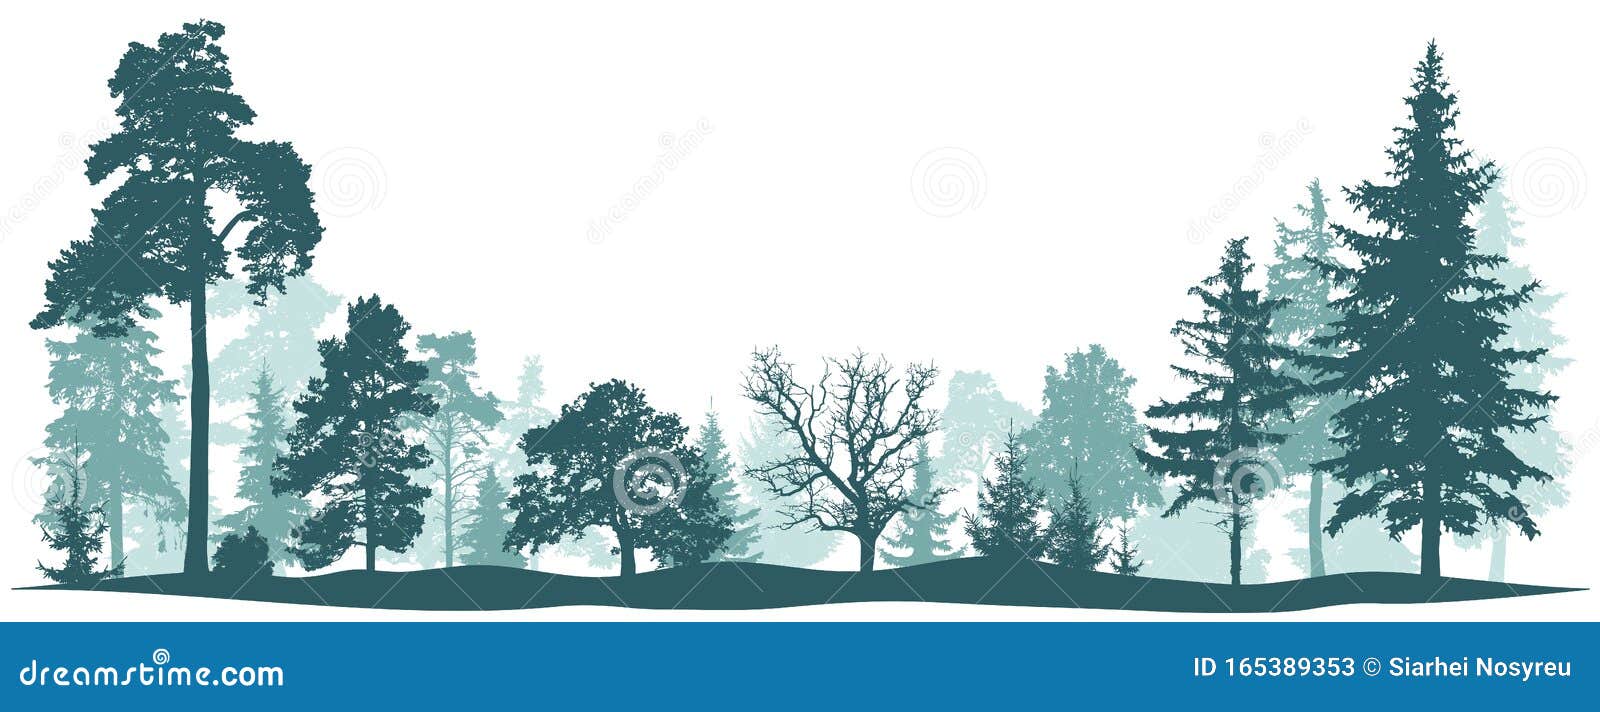 forest park tree background. nature landscape. green conifers. pine fir new year tree.  silhouette